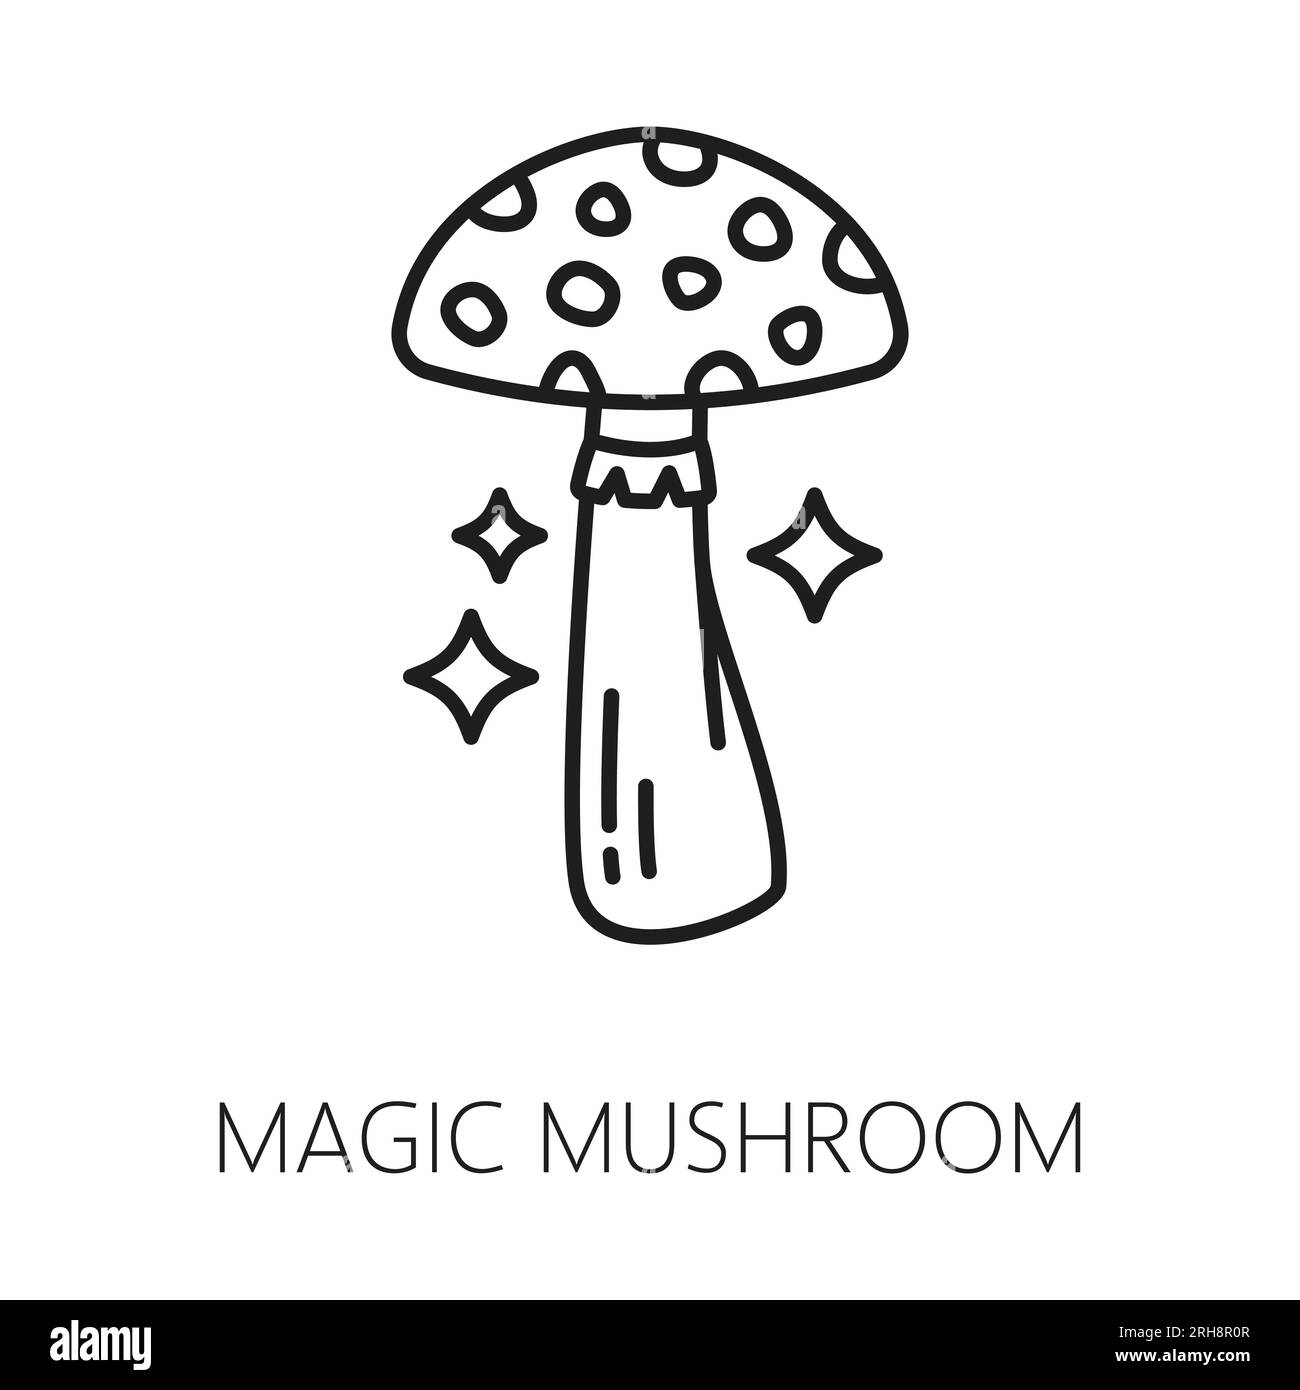 Magic mushroom, witchcraft and mystery occult icon for esoteric and spiritual sorcery, vector symbol. Magic mushroom line icon of witch potion, occultism and spiritism and astrology tarot cards sign Stock Vector